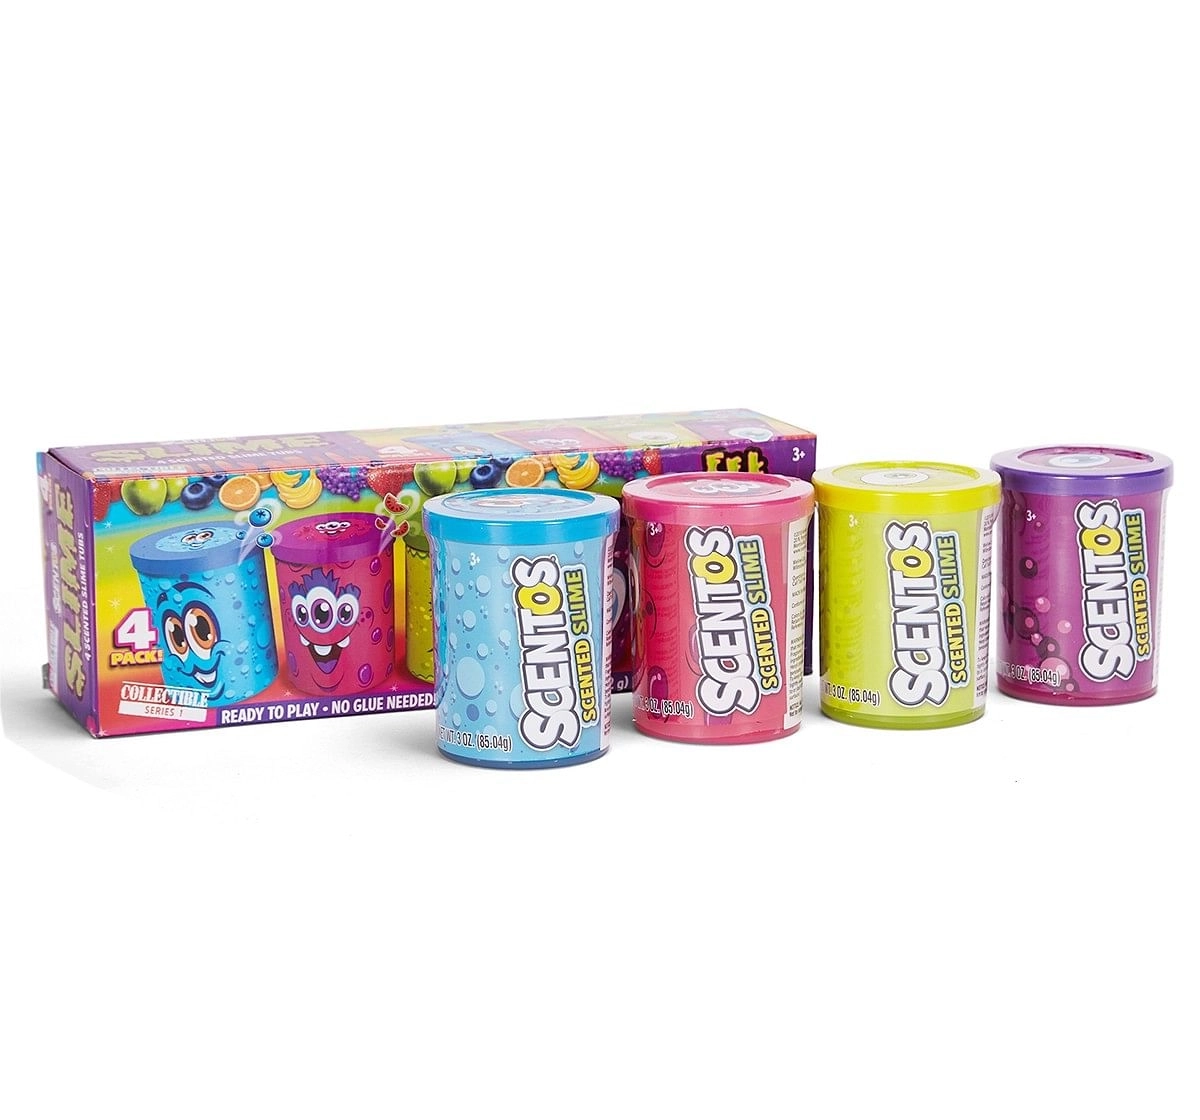 Scentos Scented Slime 3Oz Each  Science Kits for Kids age 3Y+ 